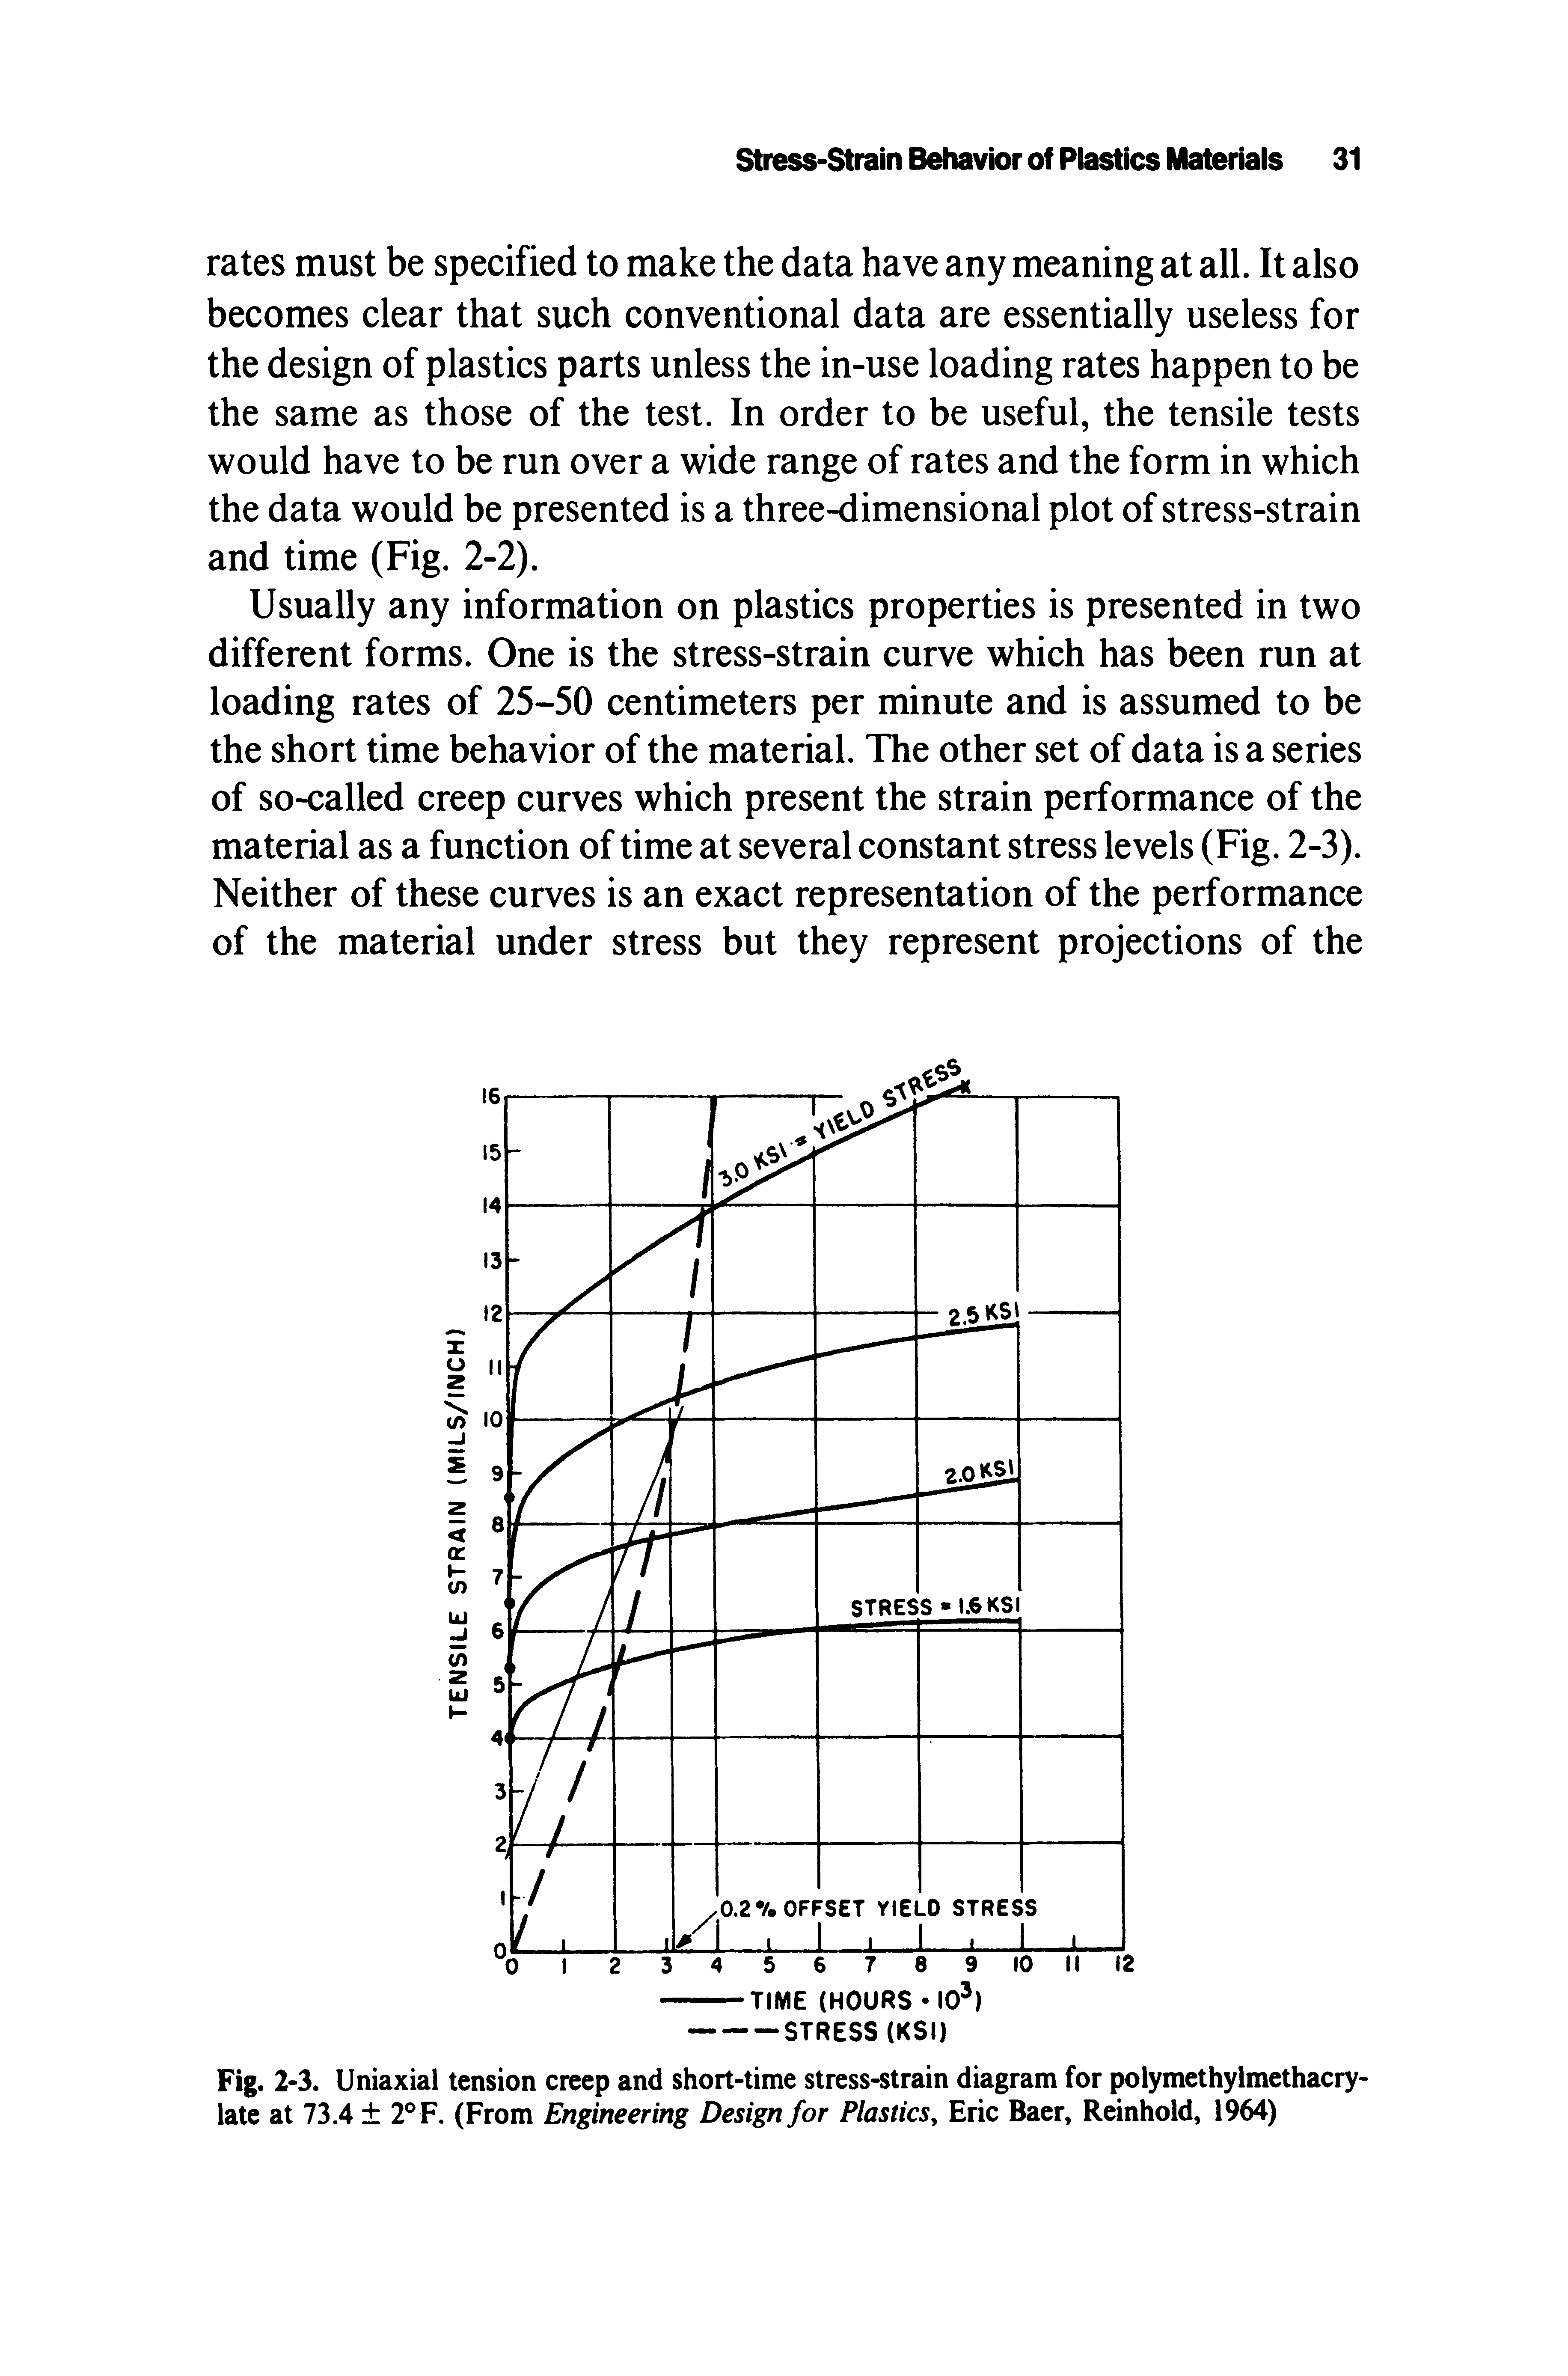 Fig. 2-3. Uniaxial tension creep and short-time stress-strain diagram for polymethylmethacrylate at 73.4 2 F. (From Engineering Design for Plastics, Eric Baer, Reinhold, 1964)...